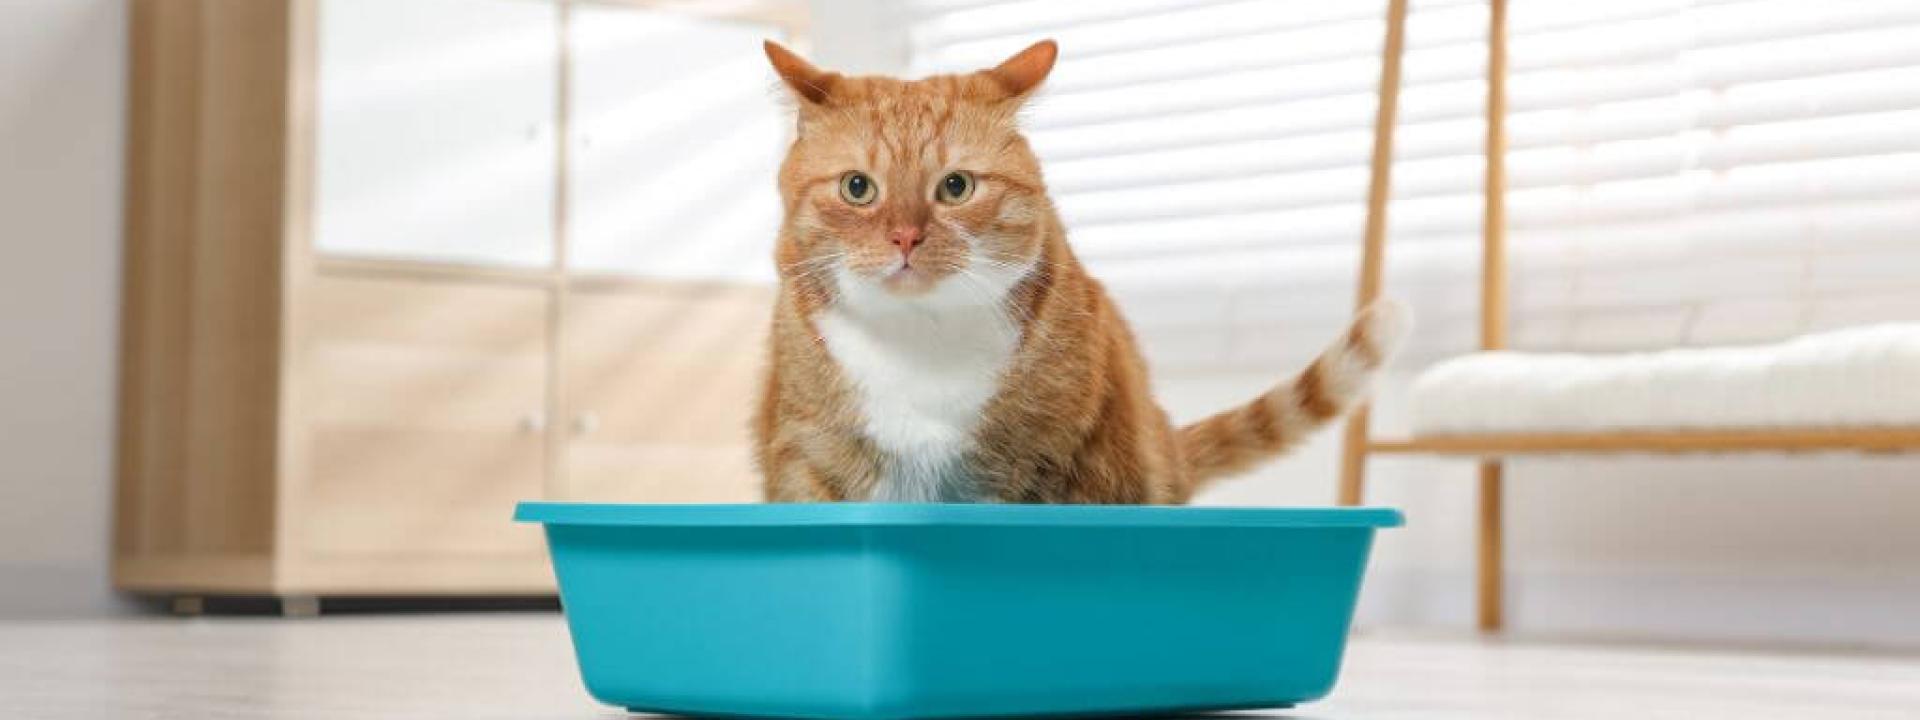 Emergency Alert: Recognizing and Treating Urinary Blockages in Cats